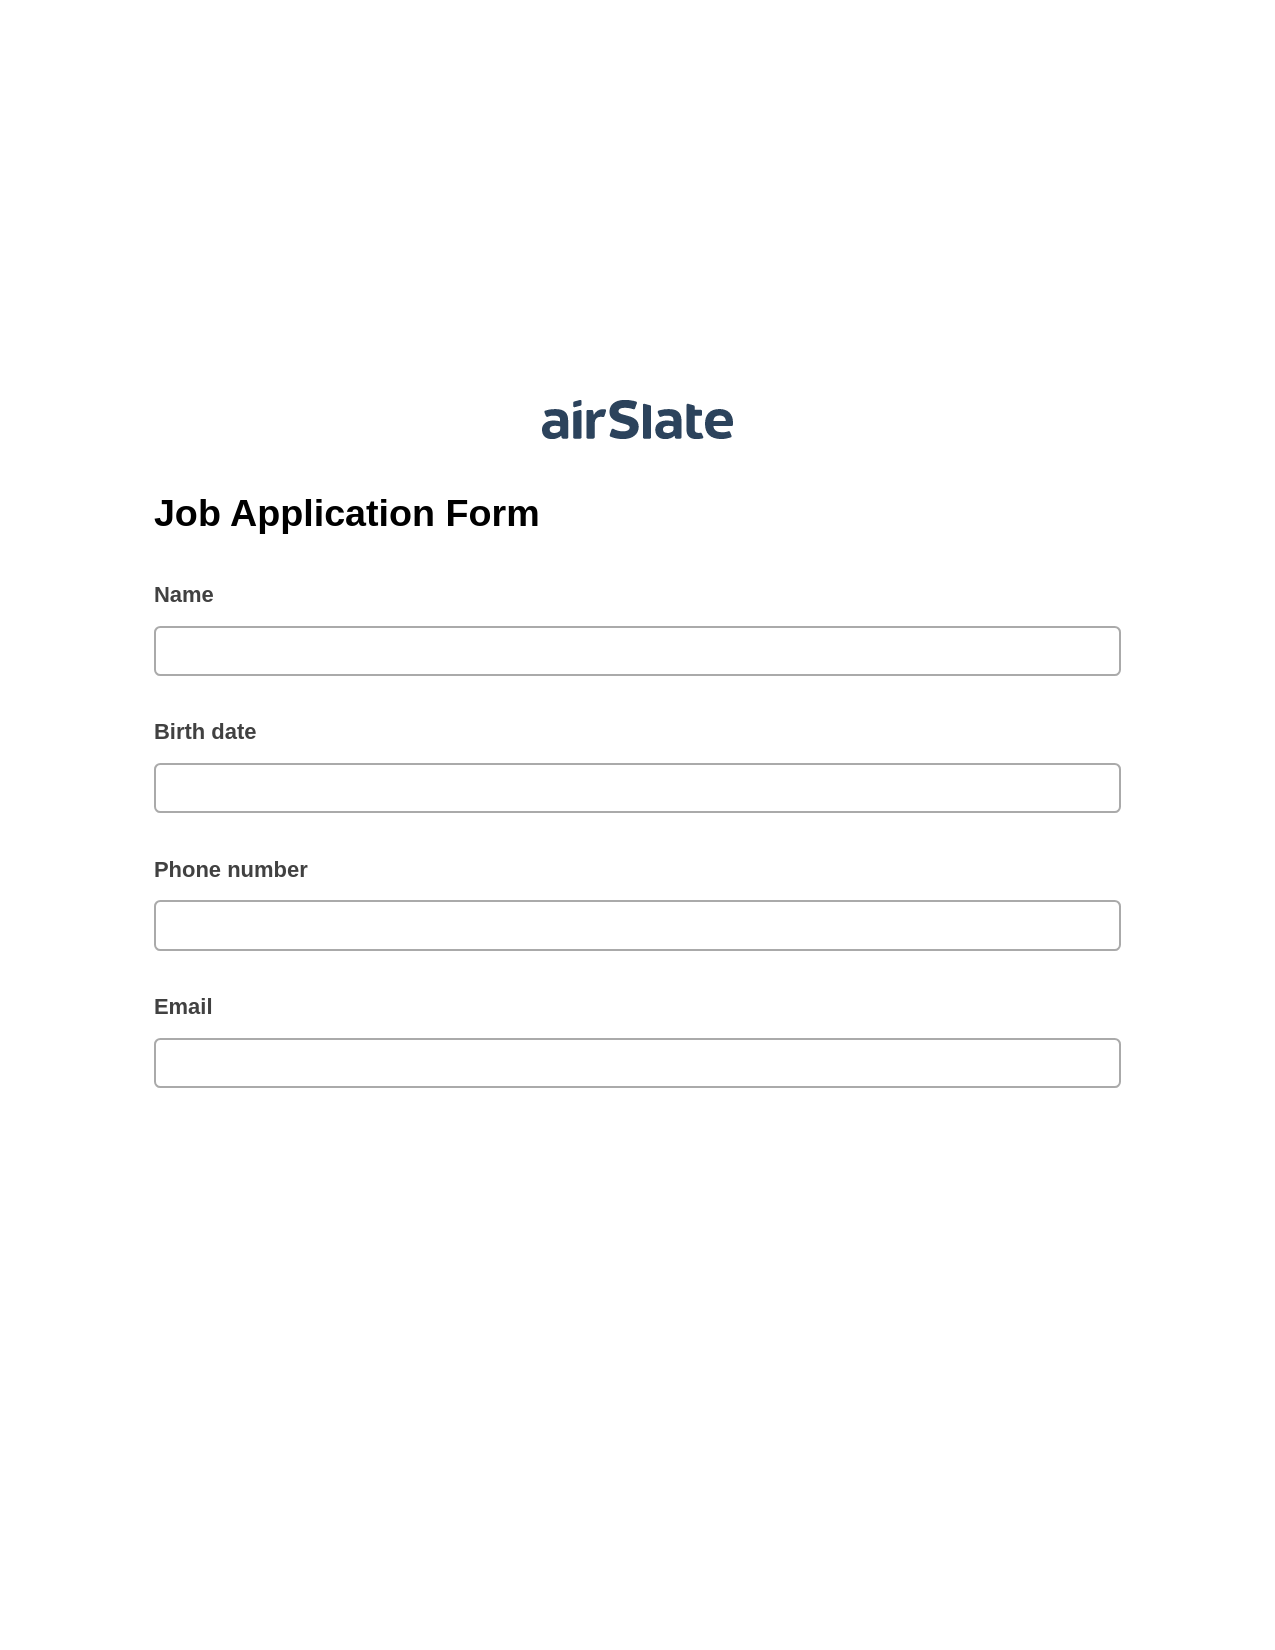 Multirole Job Application Form Pre-fill from CSV File Dropdown Options Bot, Create slate from another Flow Bot, Text Message Notification Postfinish Bot